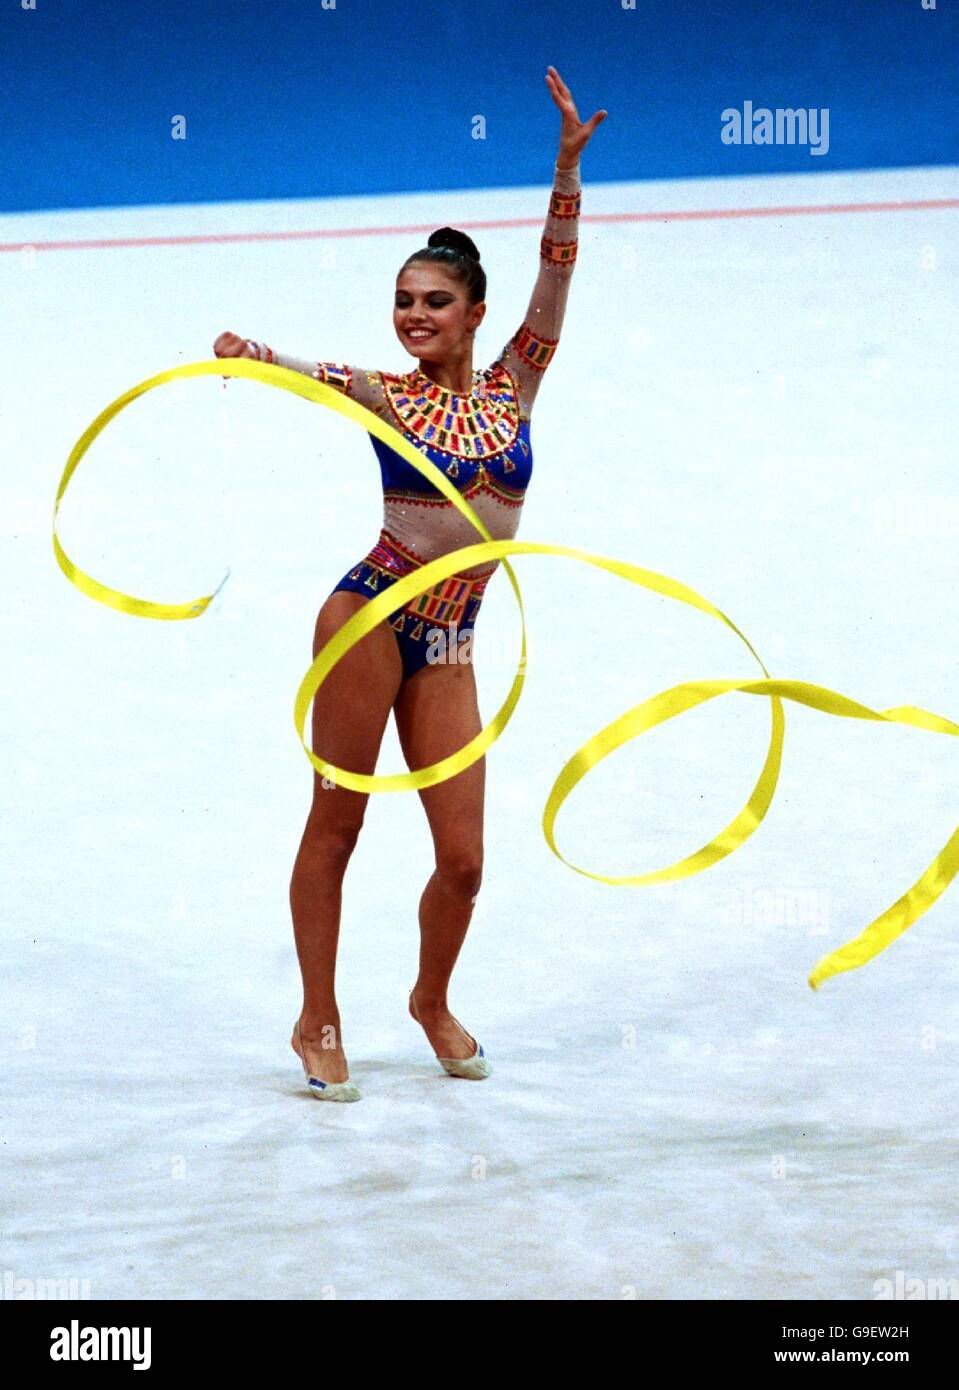 Sydney 2000 Olympics - Rhythmic Gymnastics - Women's Individual All Round Final. Russia's Alina Kabaeva in action during her Bronze medal winning performance Stock Photo